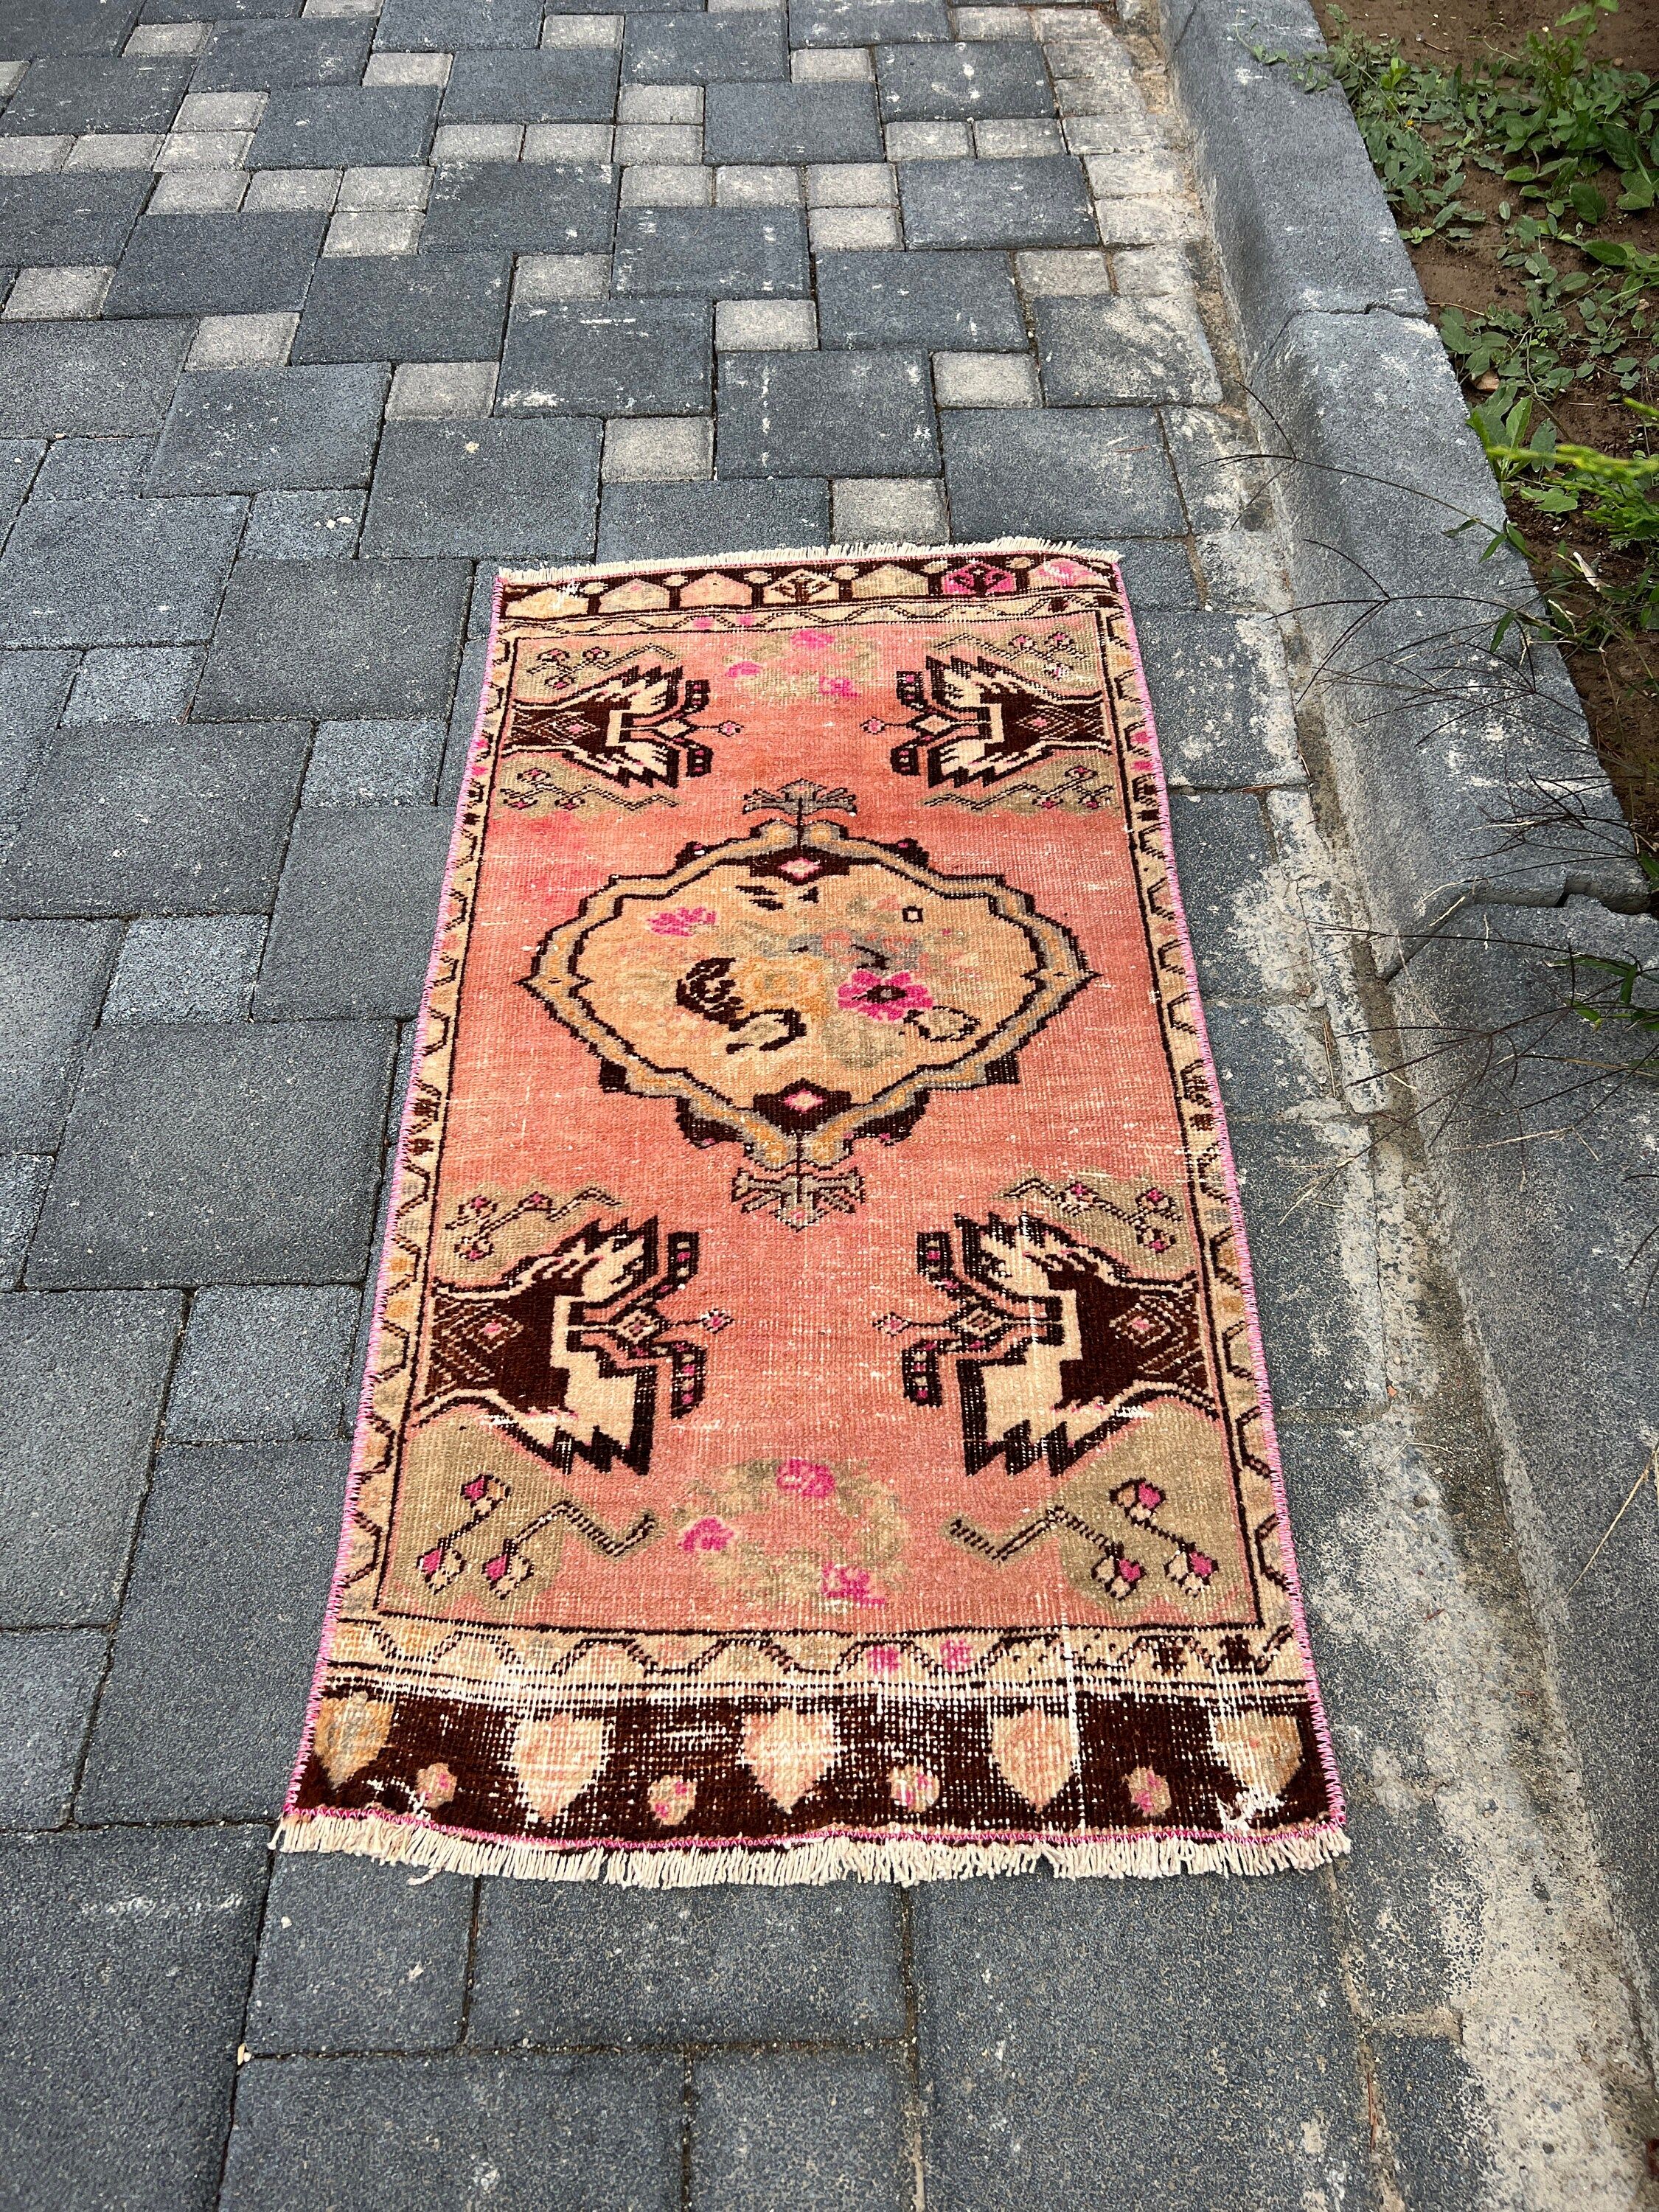 Home Decor Rug, Entry Rug, Oushak Rug, Rugs for Entry, 1.7x3.4 ft Small Rug, Car Mat Rugs, Turkish Rug, Red Oushak Rugs, Vintage Rugs